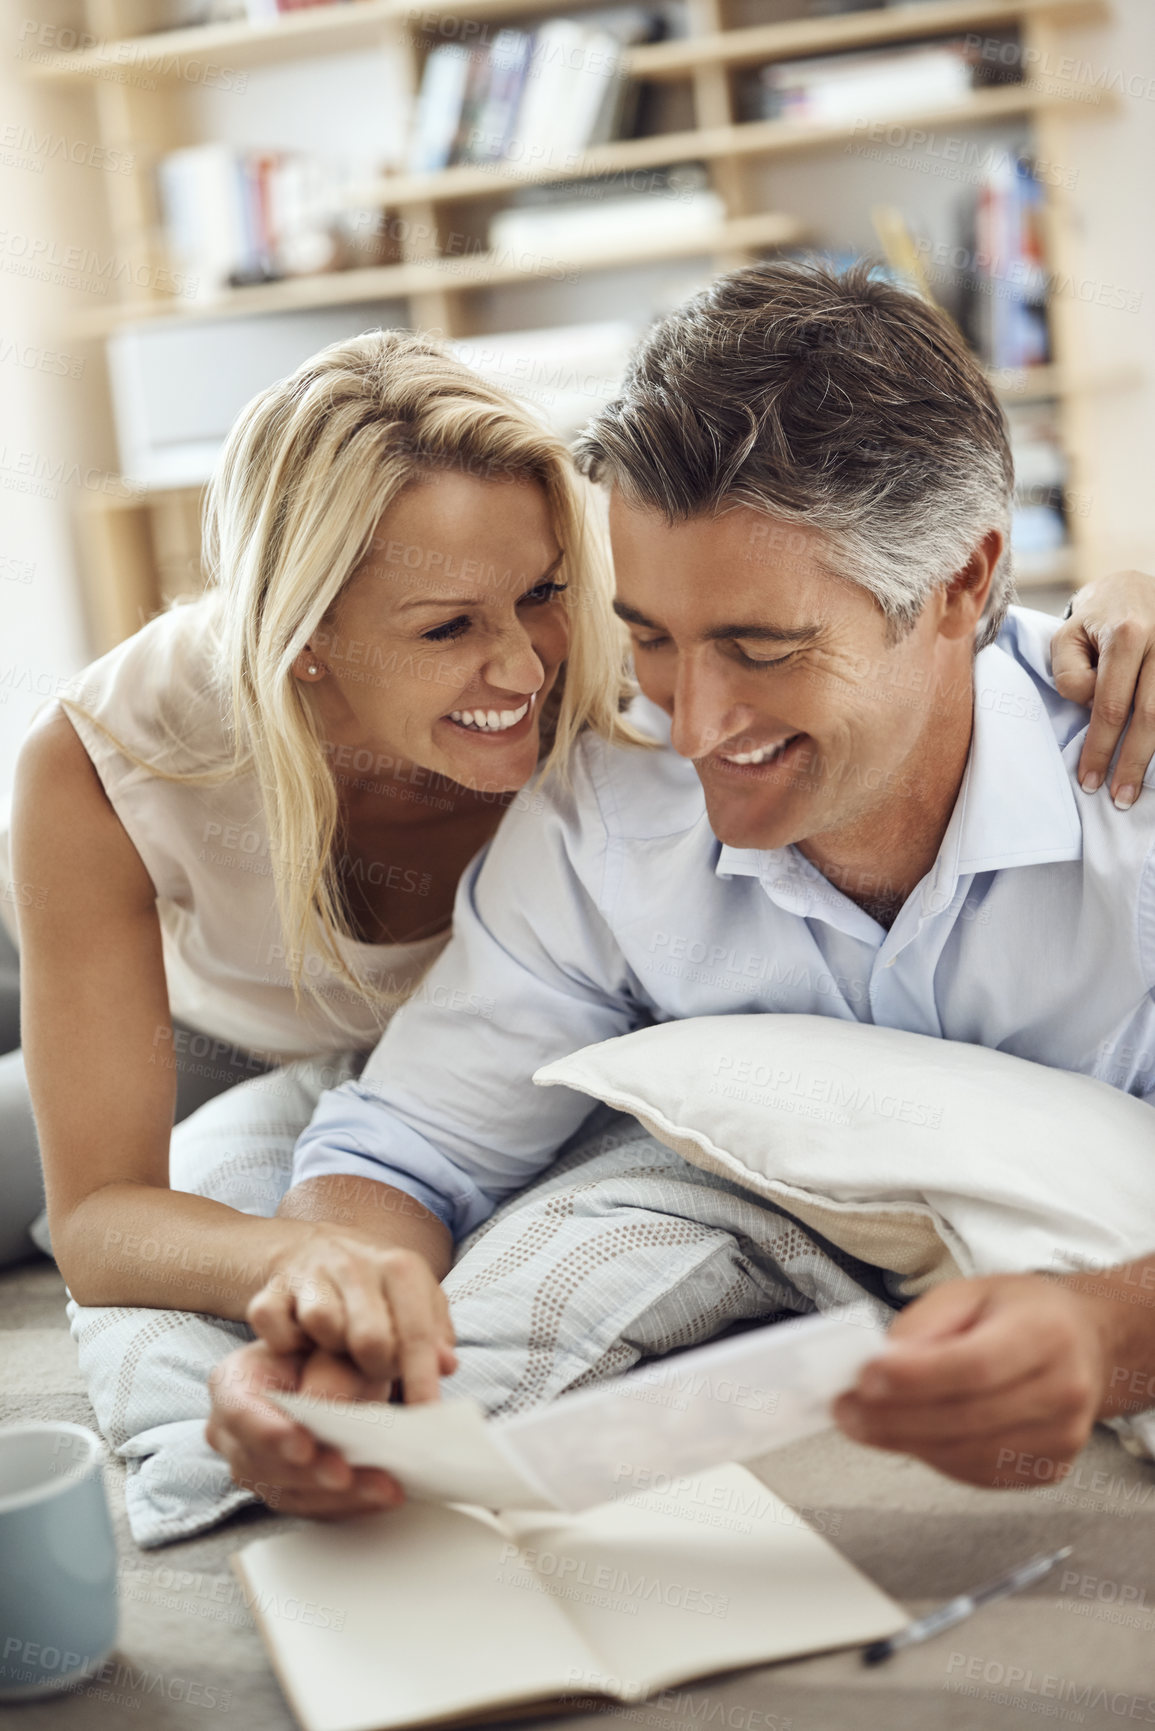 Buy stock photo Cropped shot of an affectionate mature couple lying on their living room floor looking at photographs